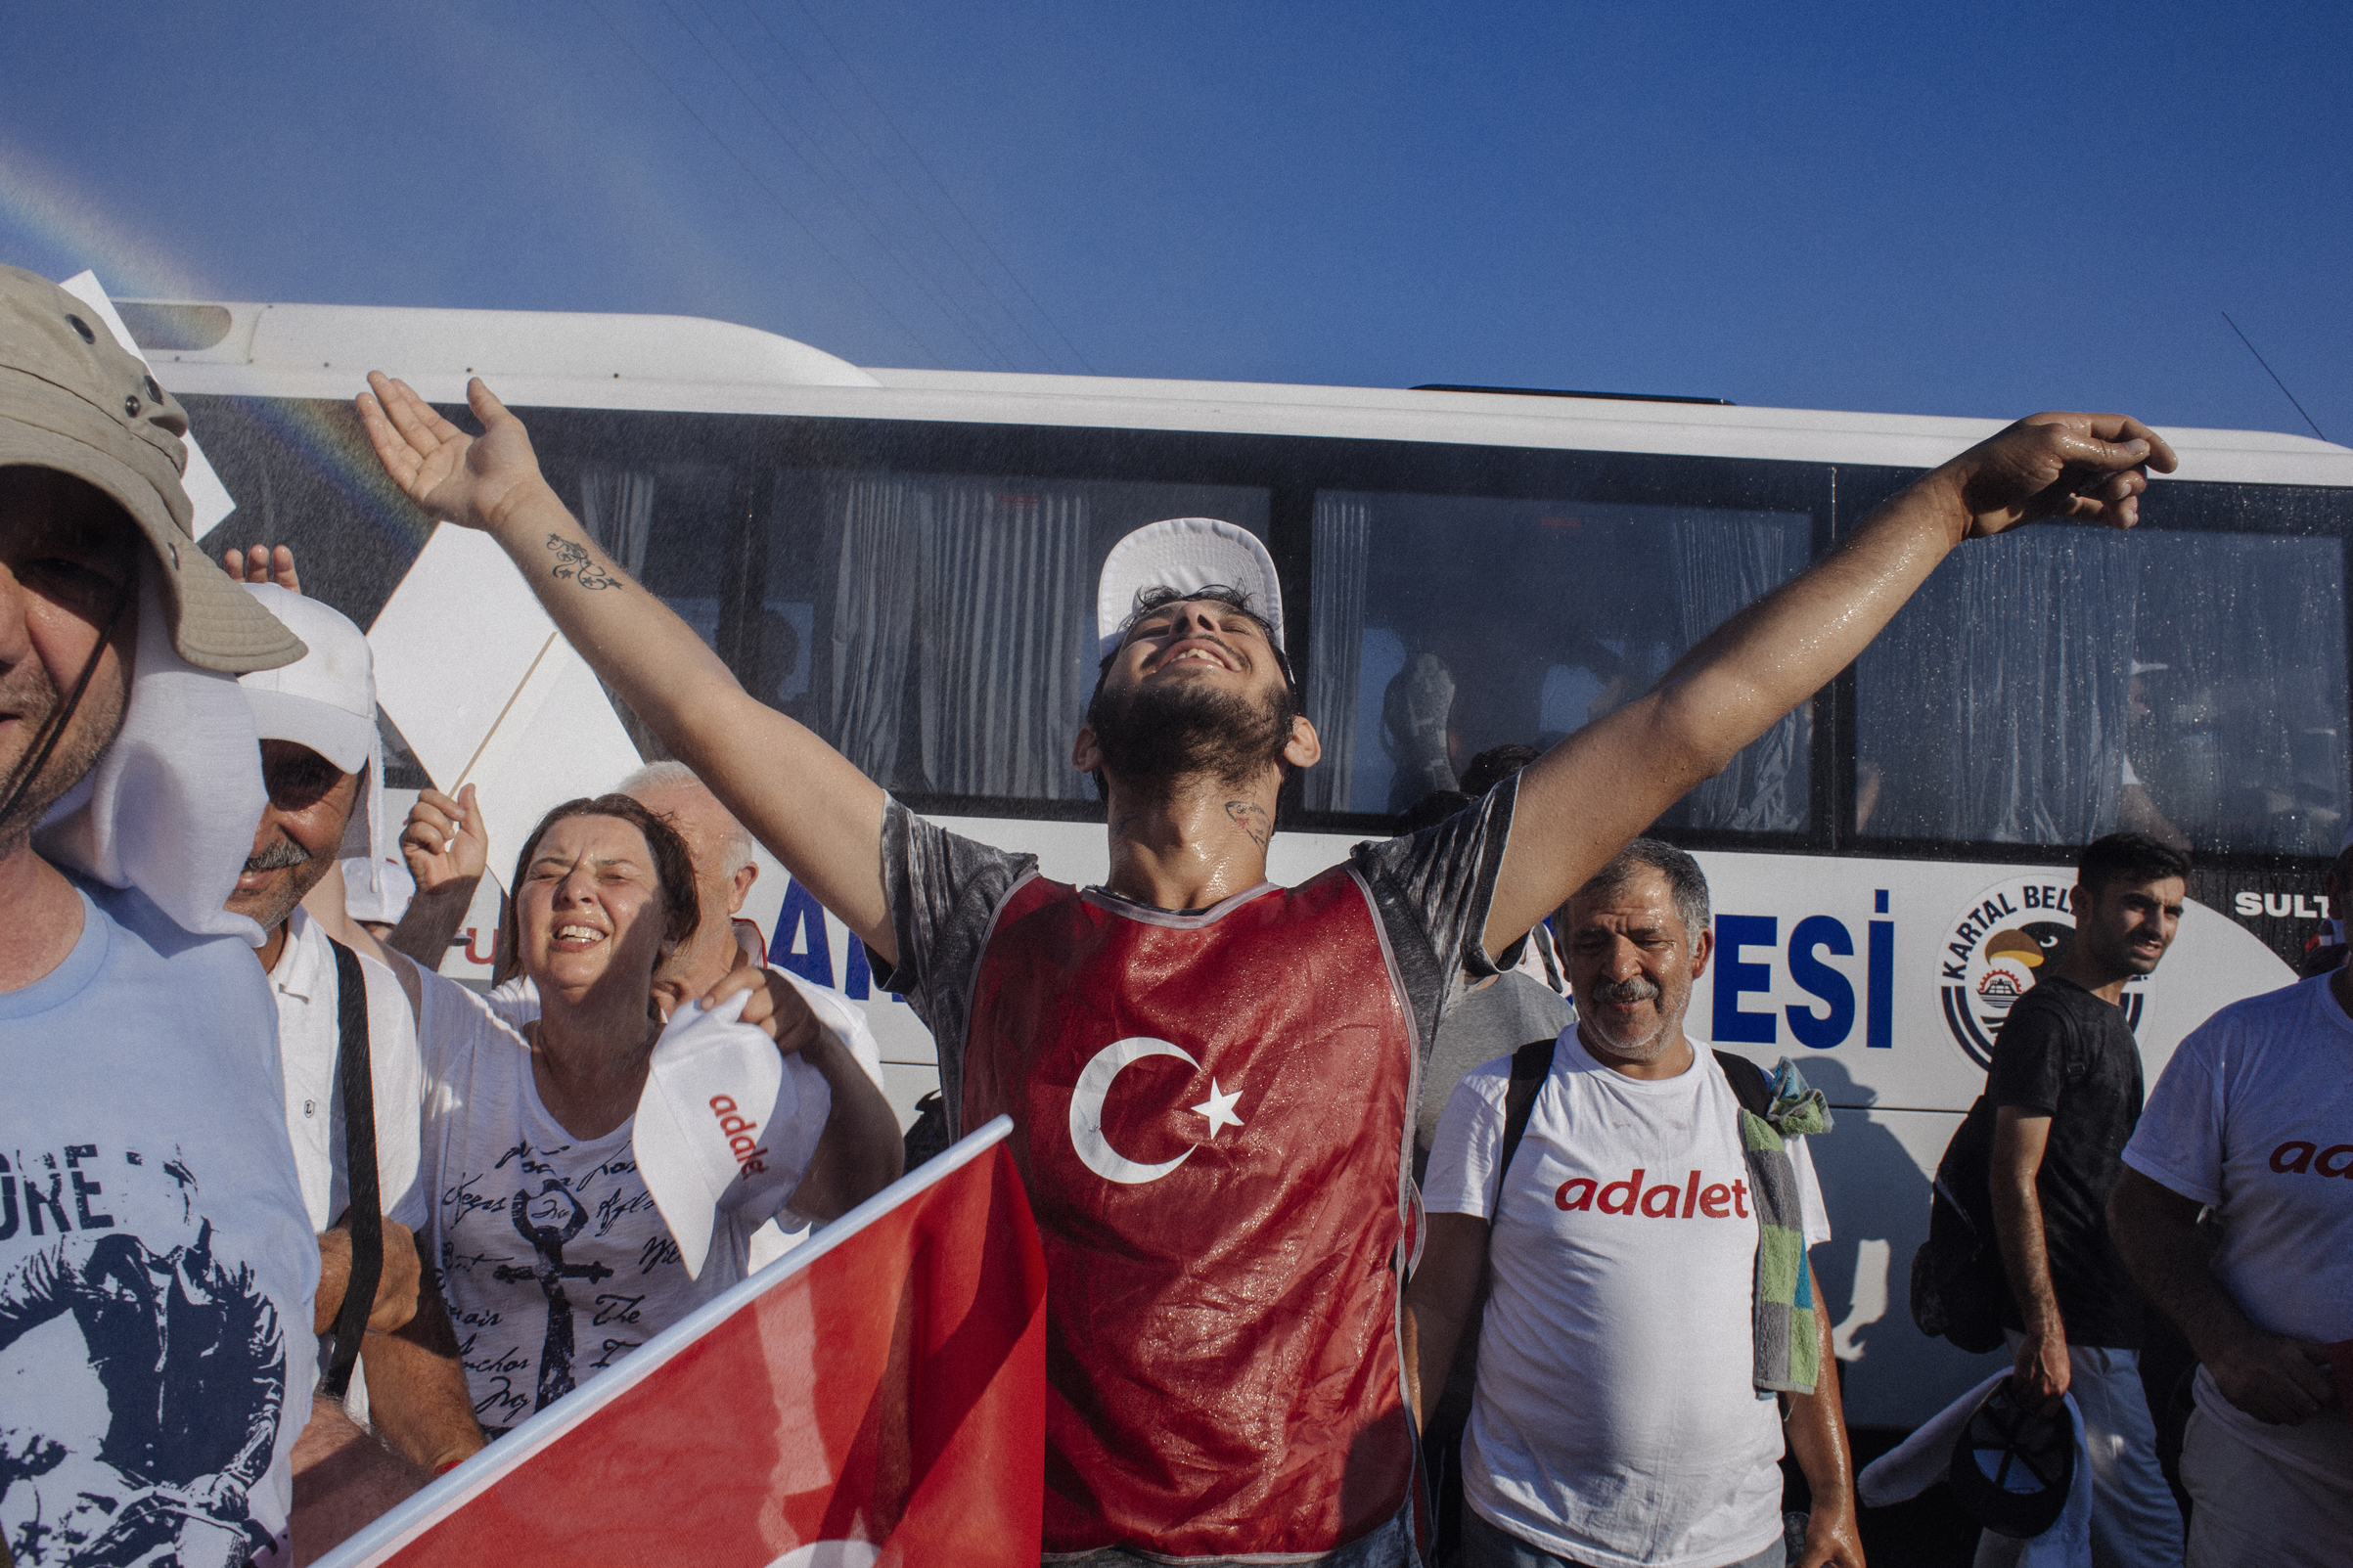 Marchers are cooled by the spray of water in Kartepe, Turkey, July 2, 2017, during  one of the most intense heat waves in a century. On June 15, thousands of people began walking in shifts from Ankara to Istanbul in opposition to the government of President Recep Tayyip Erdogan. Since last year's July 15, 2016 attempted coup, more than 47,000 people have been arrested by the government.